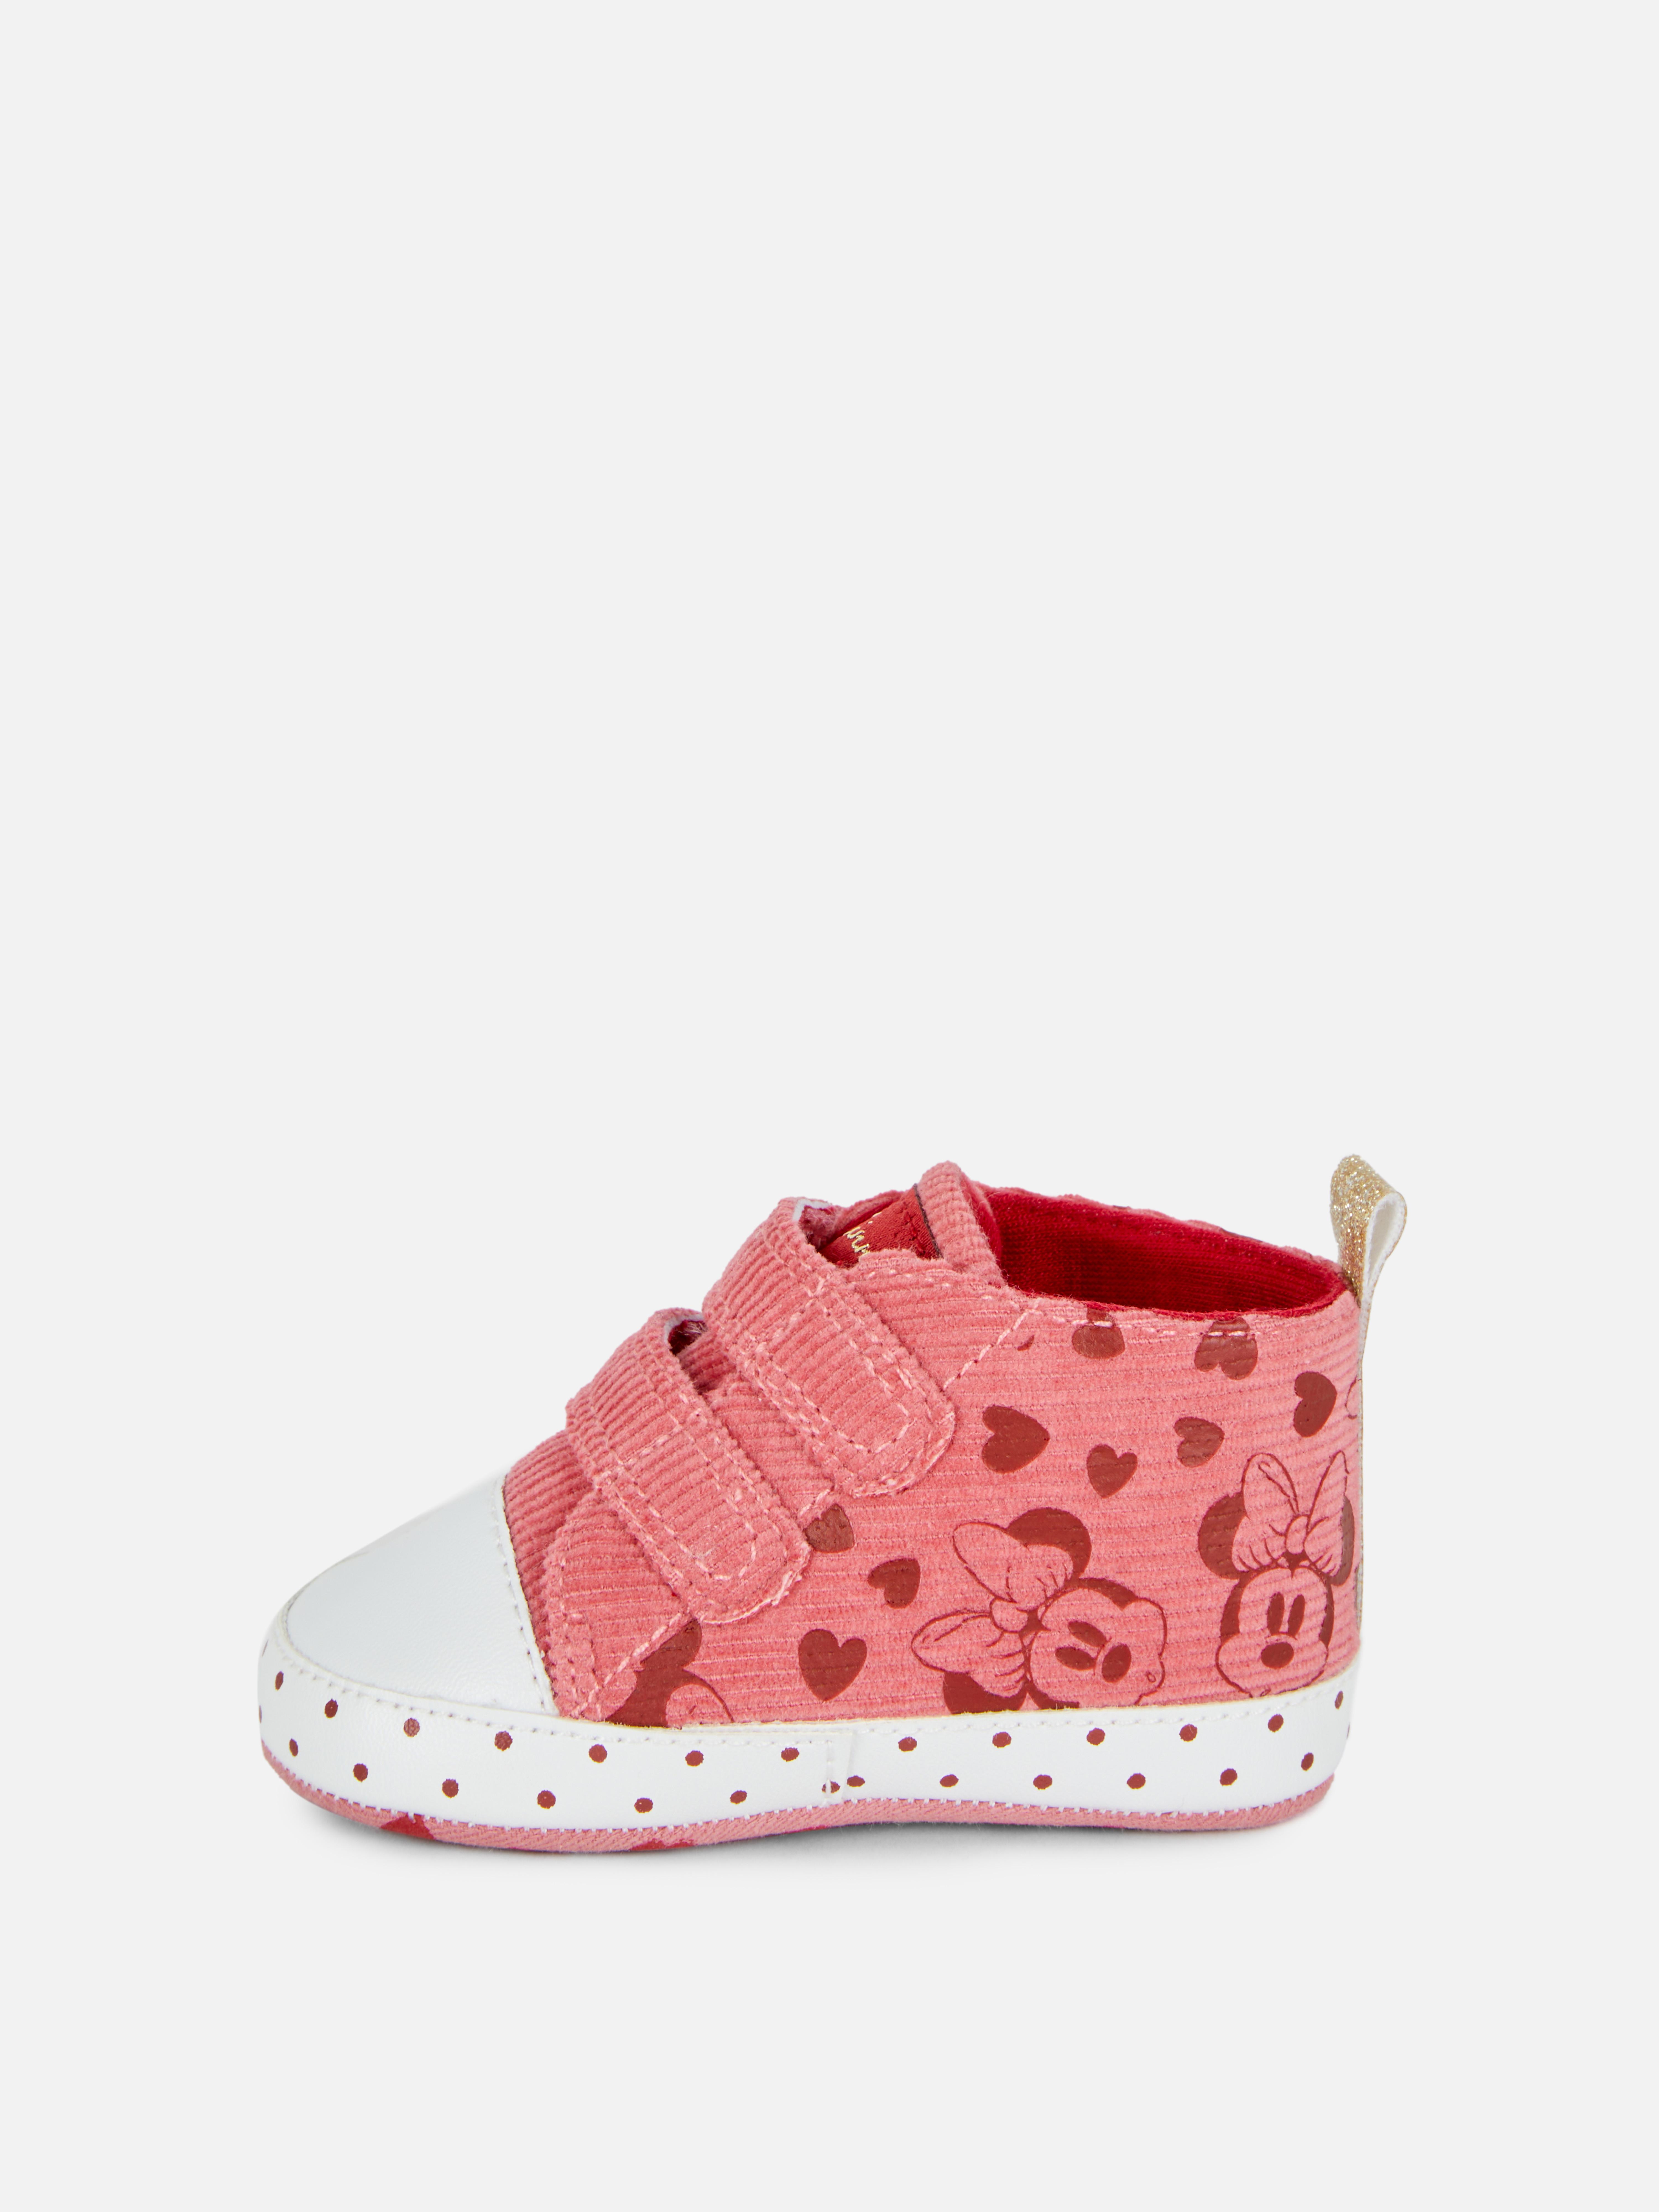 Disney’s Minnie Mouse High-Top Shoes